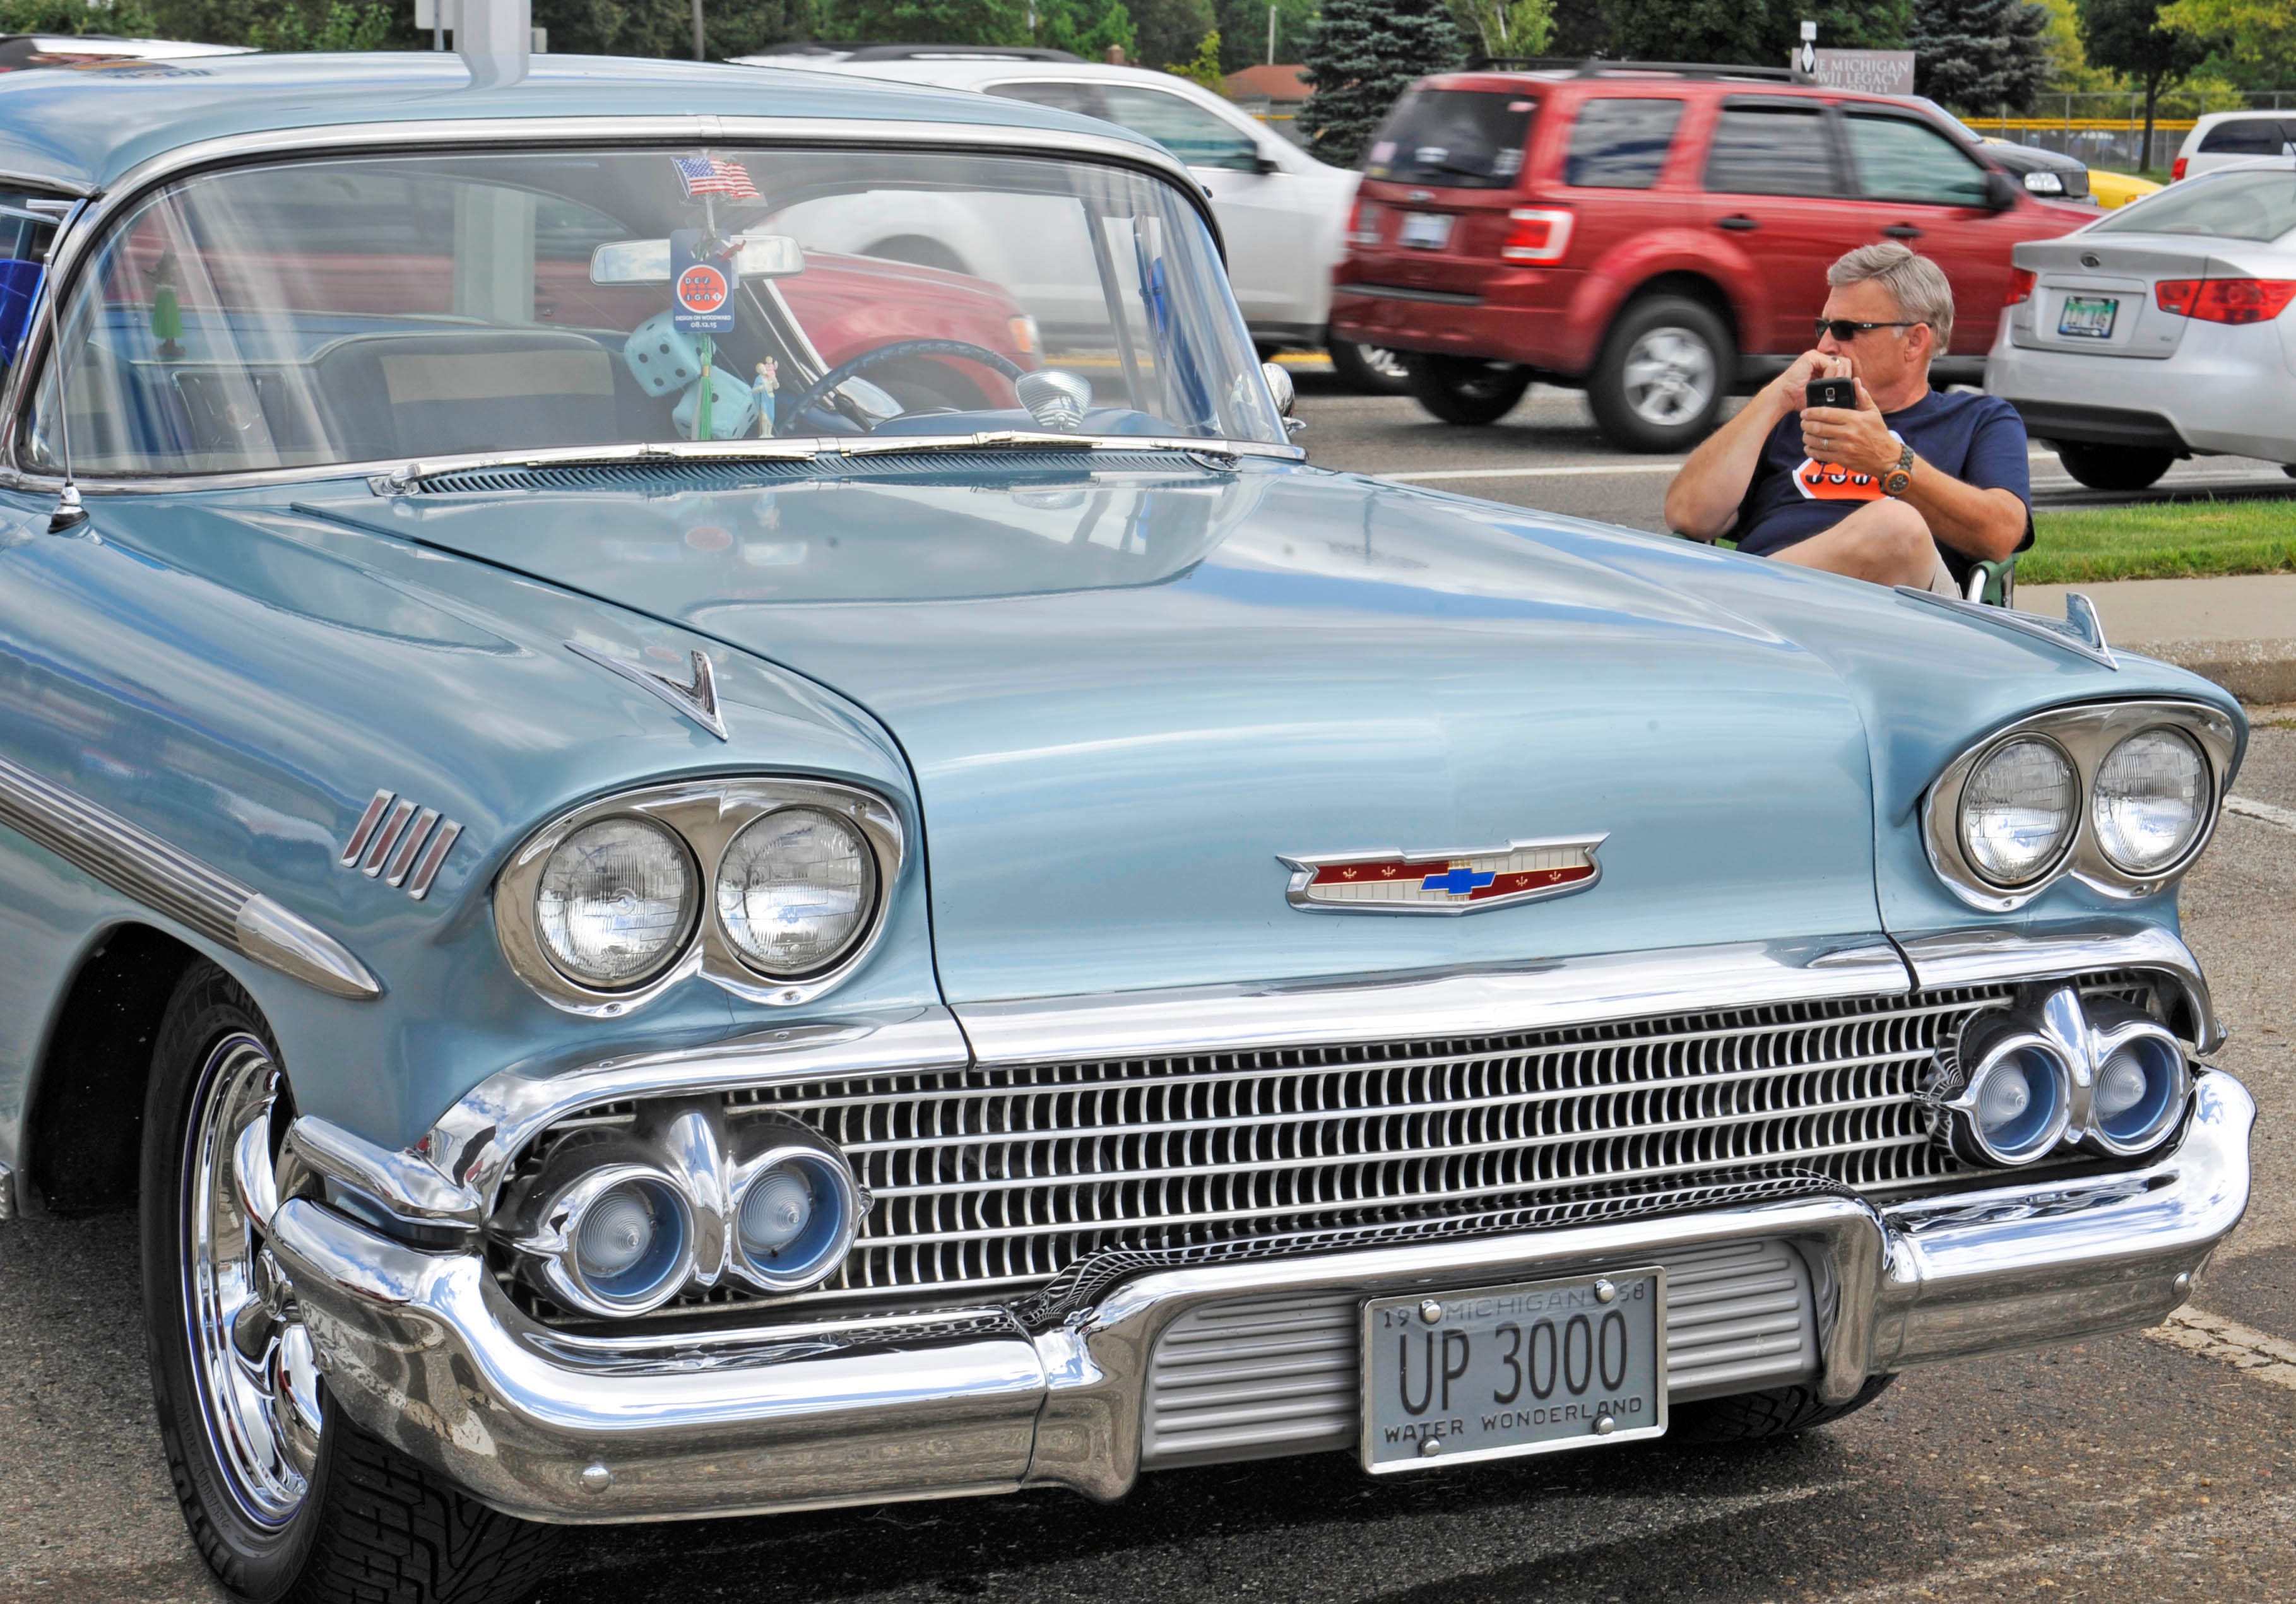 Al Bitell of Livonia sits with his 1958 Chevrolet Impala during a design show as part of the Woodward Dream Cruise at 13 Mile and Woodward in Royal Oak, Aug. 12, 2015.